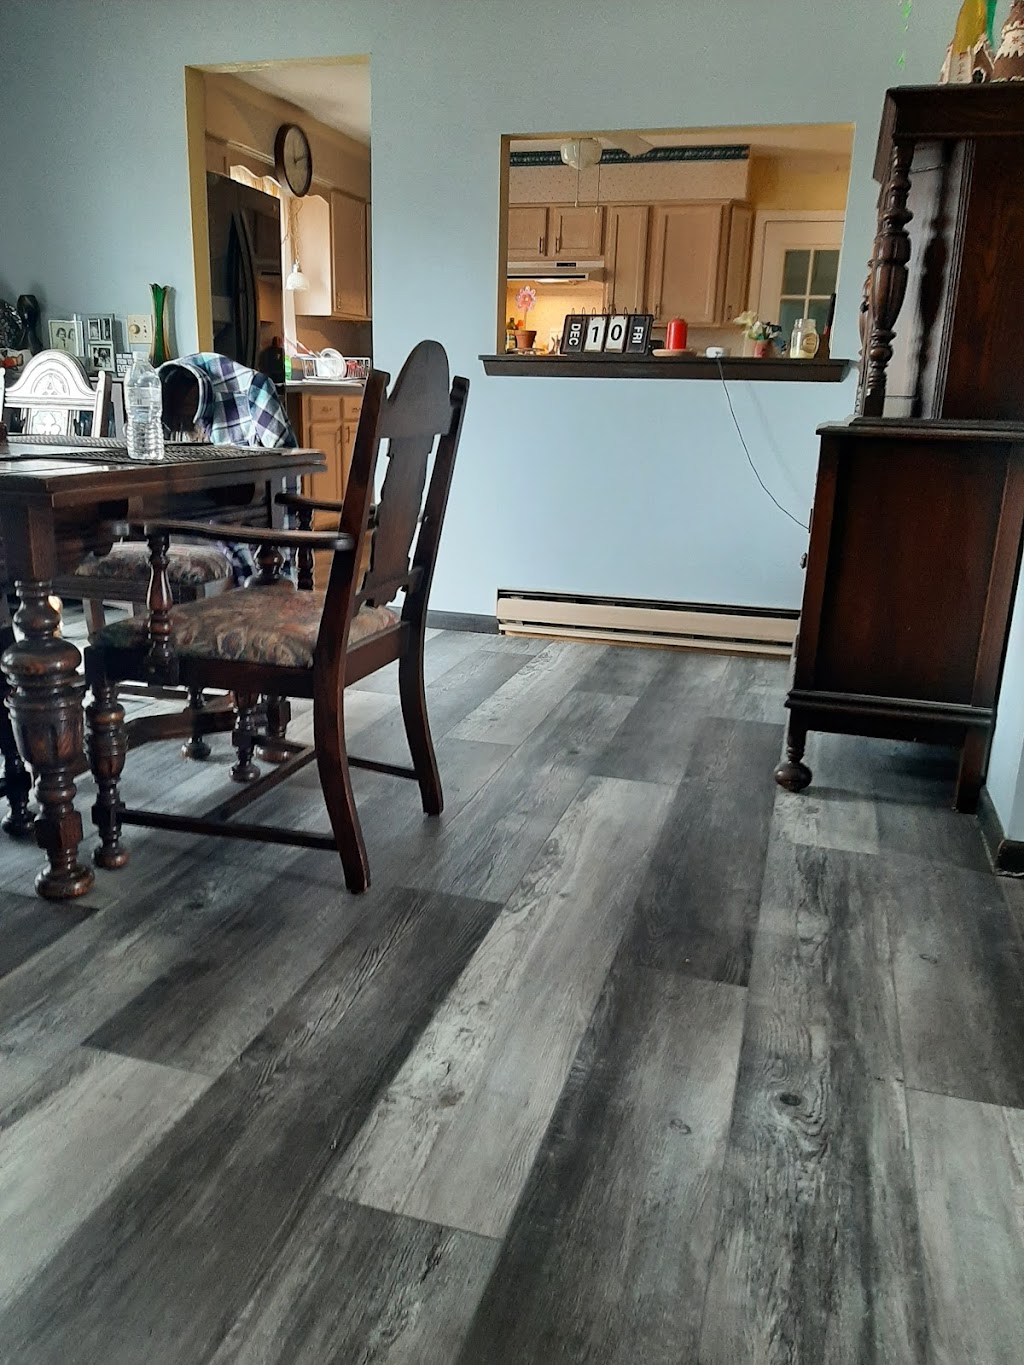 Rockwood Flooring (by appointment only) | 12077 Leavitt Rd, Oberlin, OH 44074, USA | Phone: (440) 776-8984